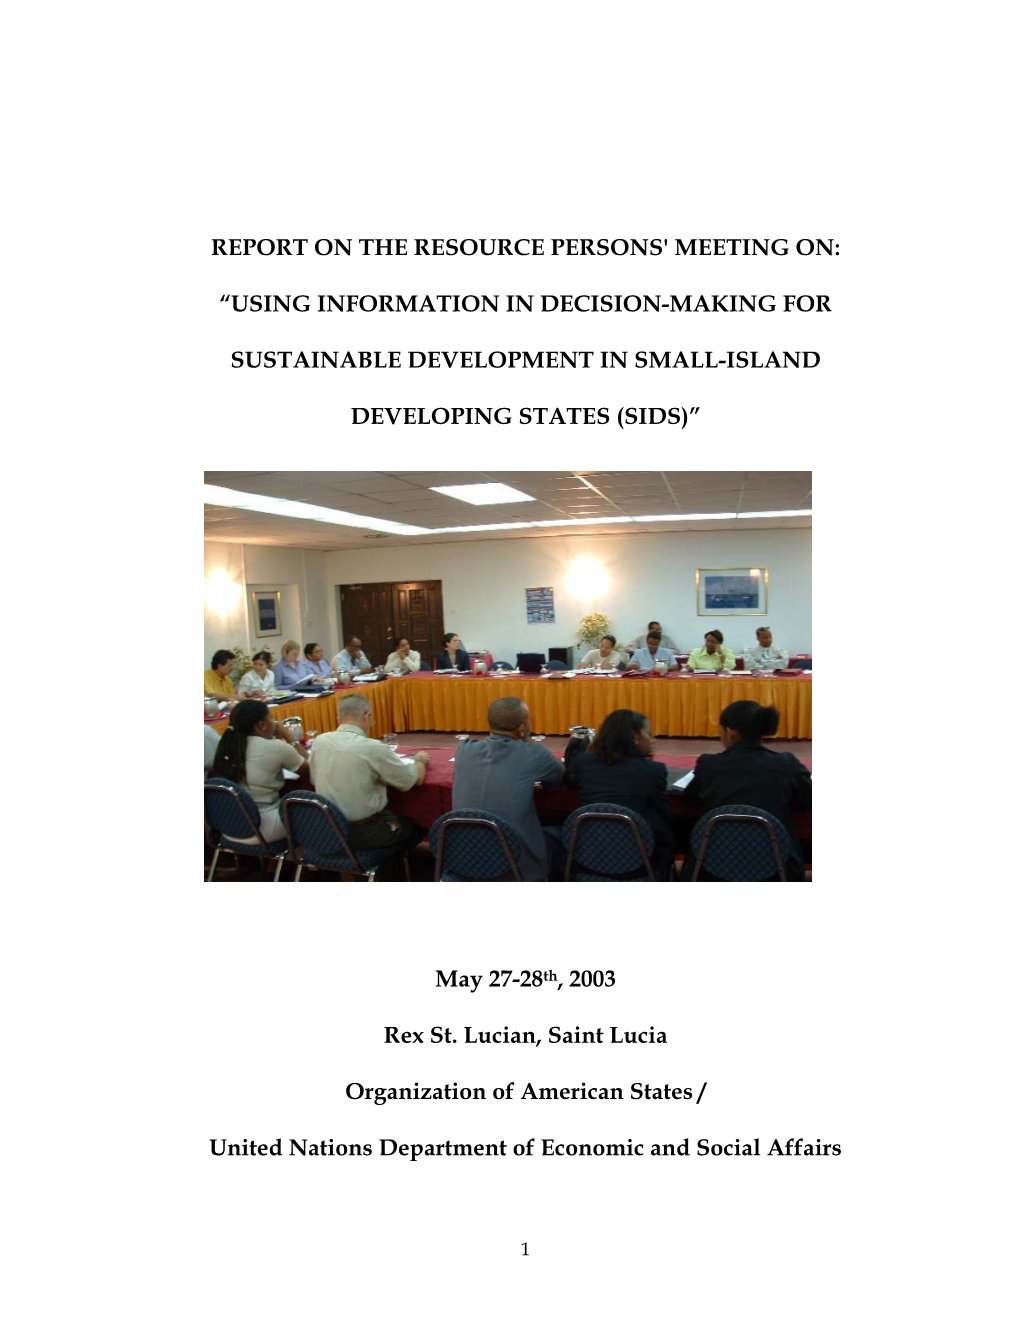 USING INFORMATION in DECISION-MAKING for SUSTAINABLE DEVELOPMENT in SMALL-ISLAND DEVELOPING STATES” Report on the Resource Person's Meeting